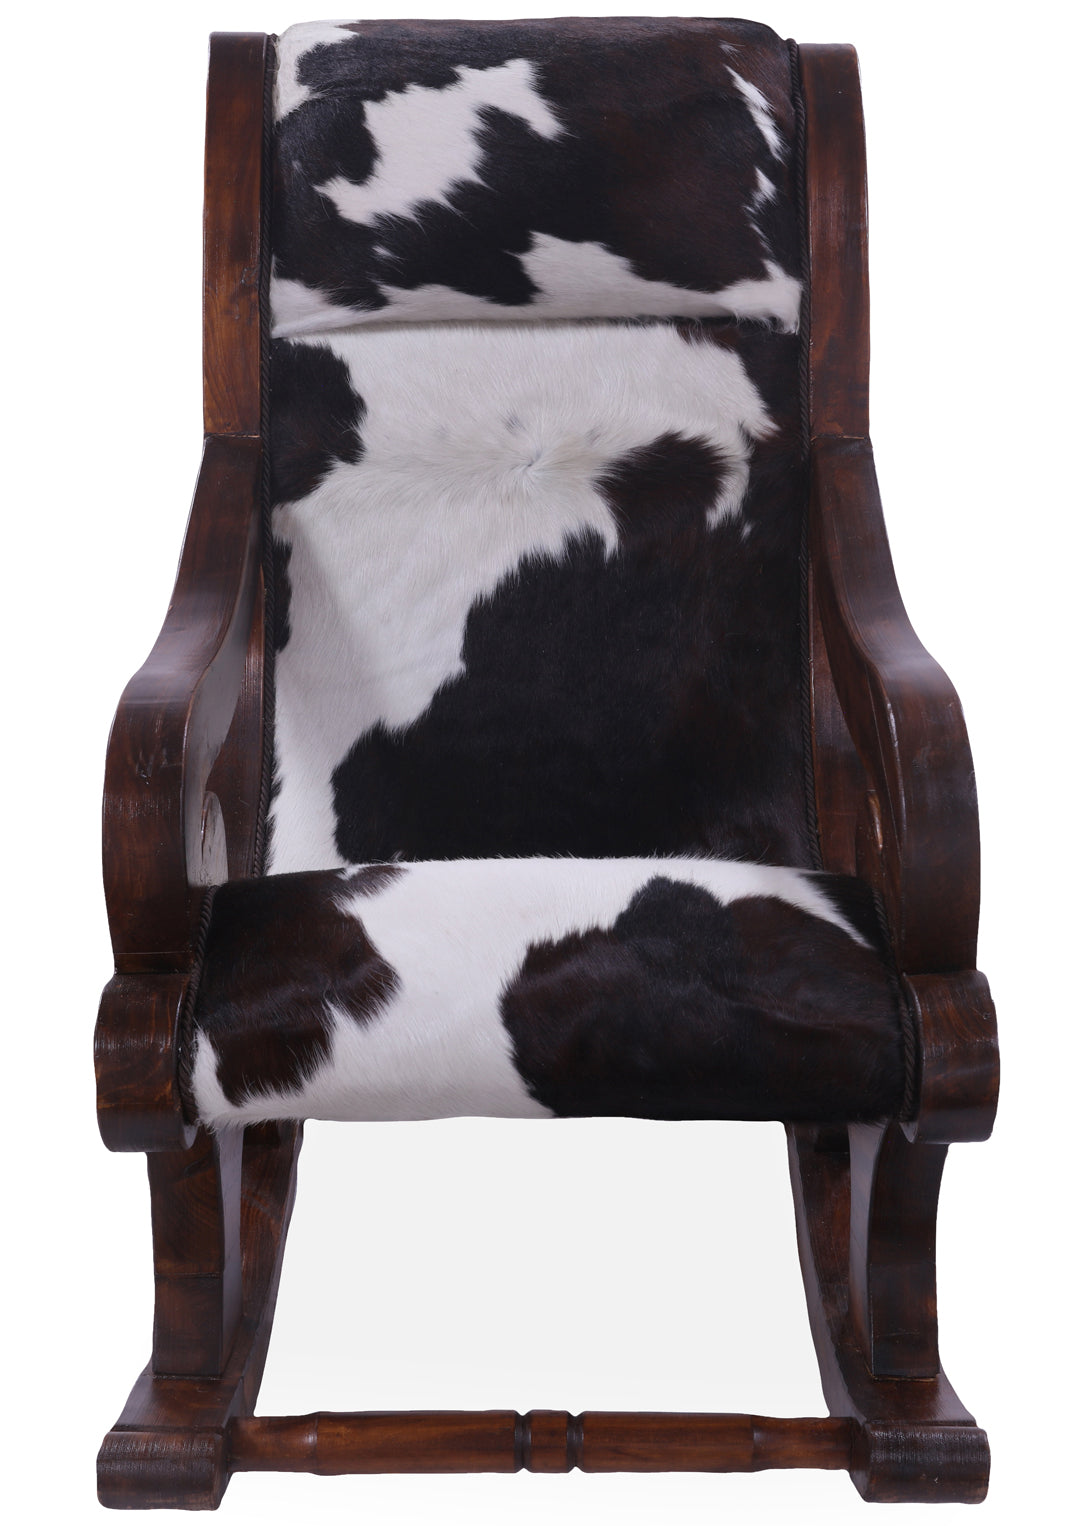 Hair-On Cowhide Wooden Handcrafted Rocking Chair